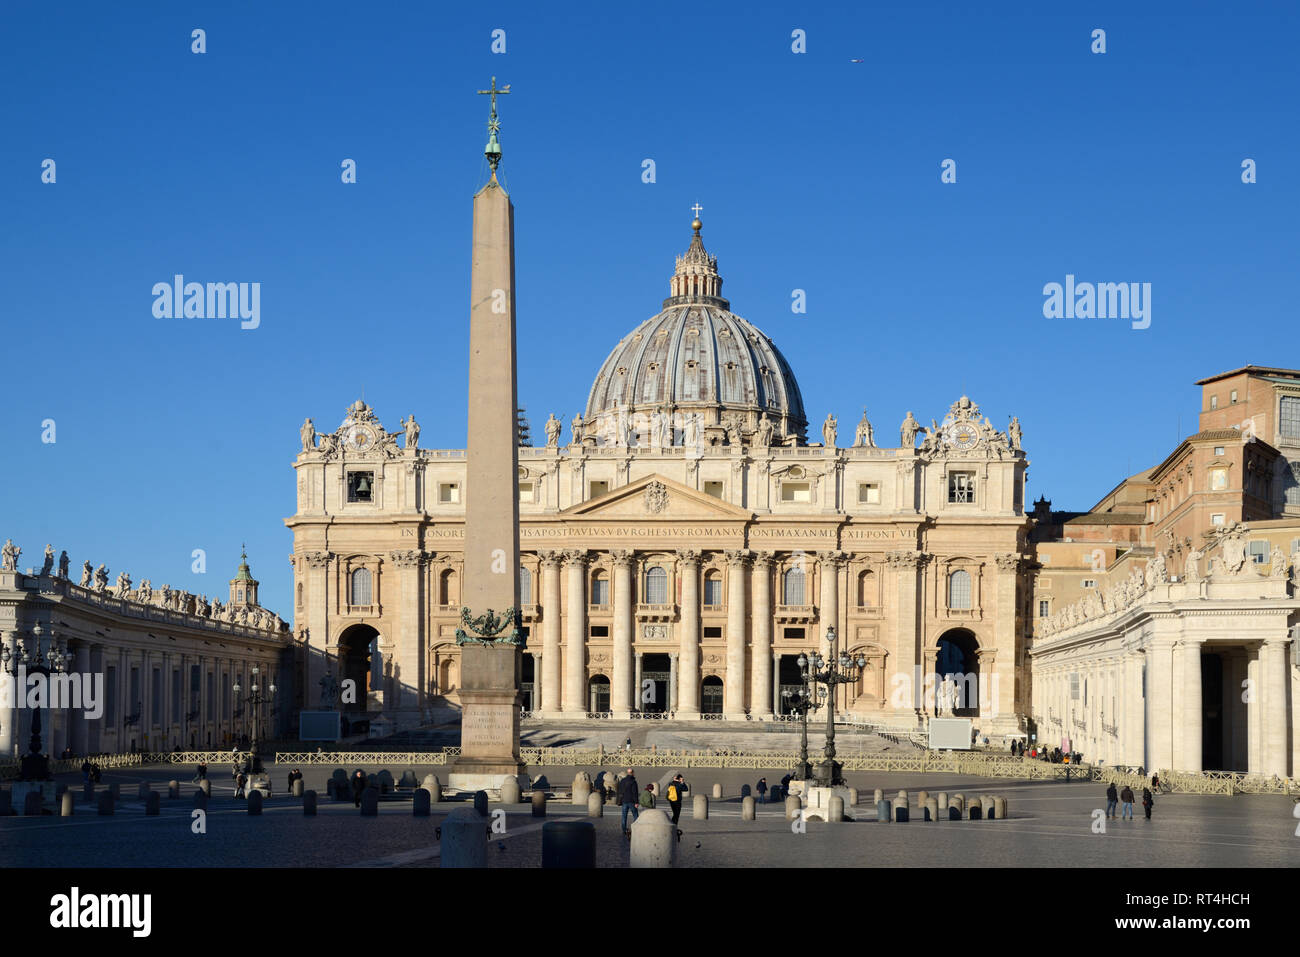 Saint Peter's Basilica and Square, and Ancient Egyptian Obelisk, Vatican City Rome Italy Stock Photo